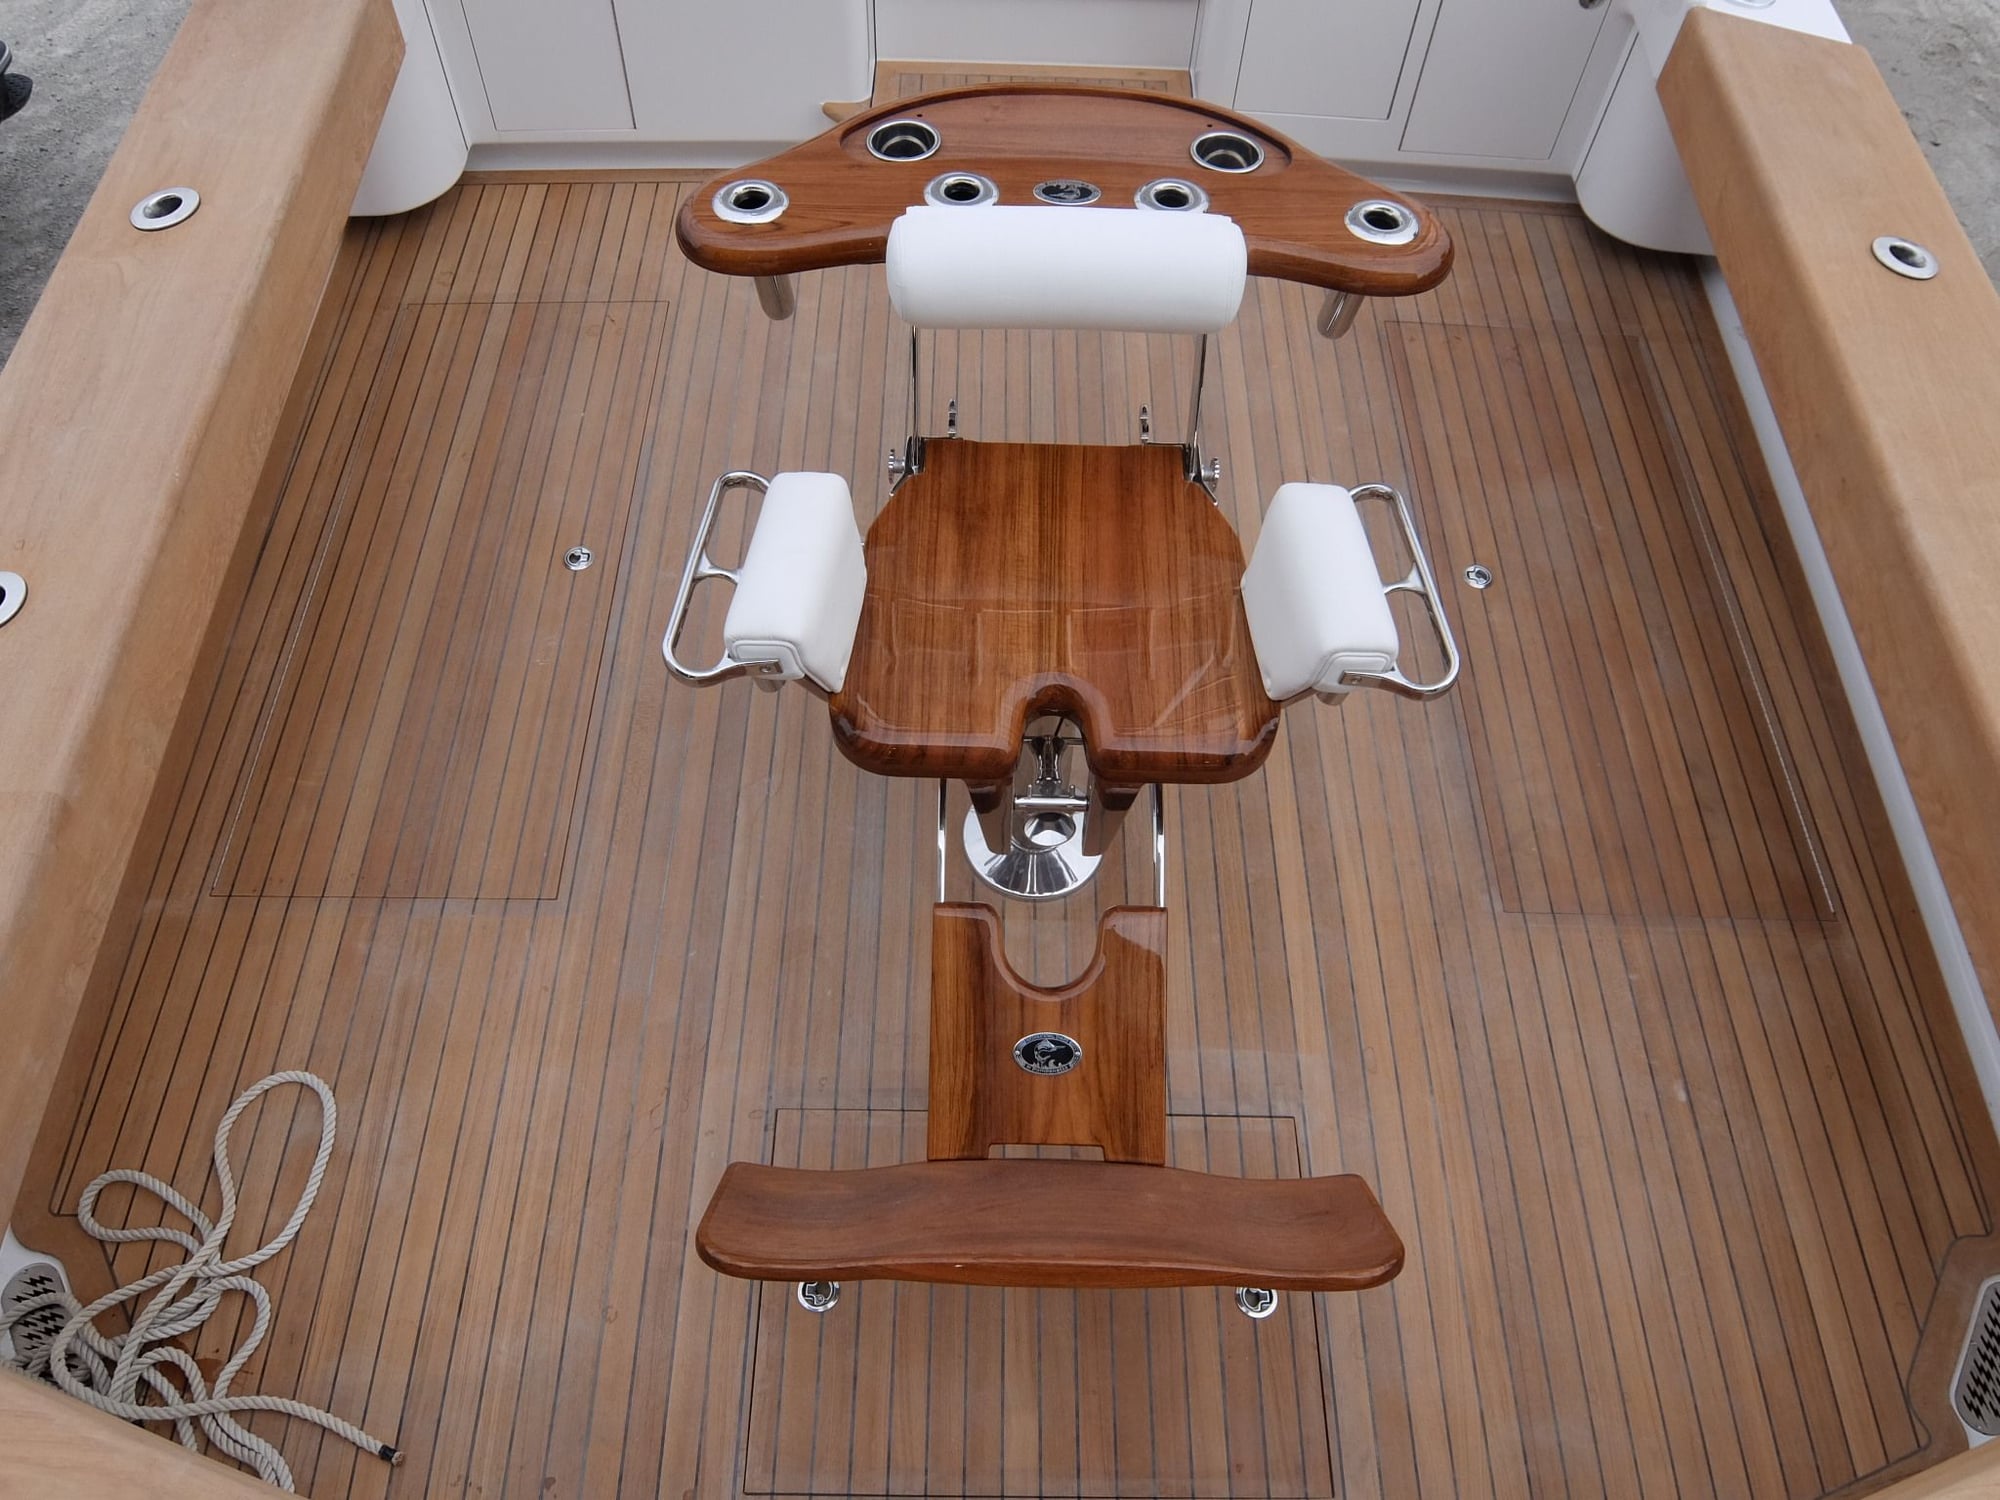 Hinged Hatch in Wood Flooring - The Hull Truth - Boating and ...